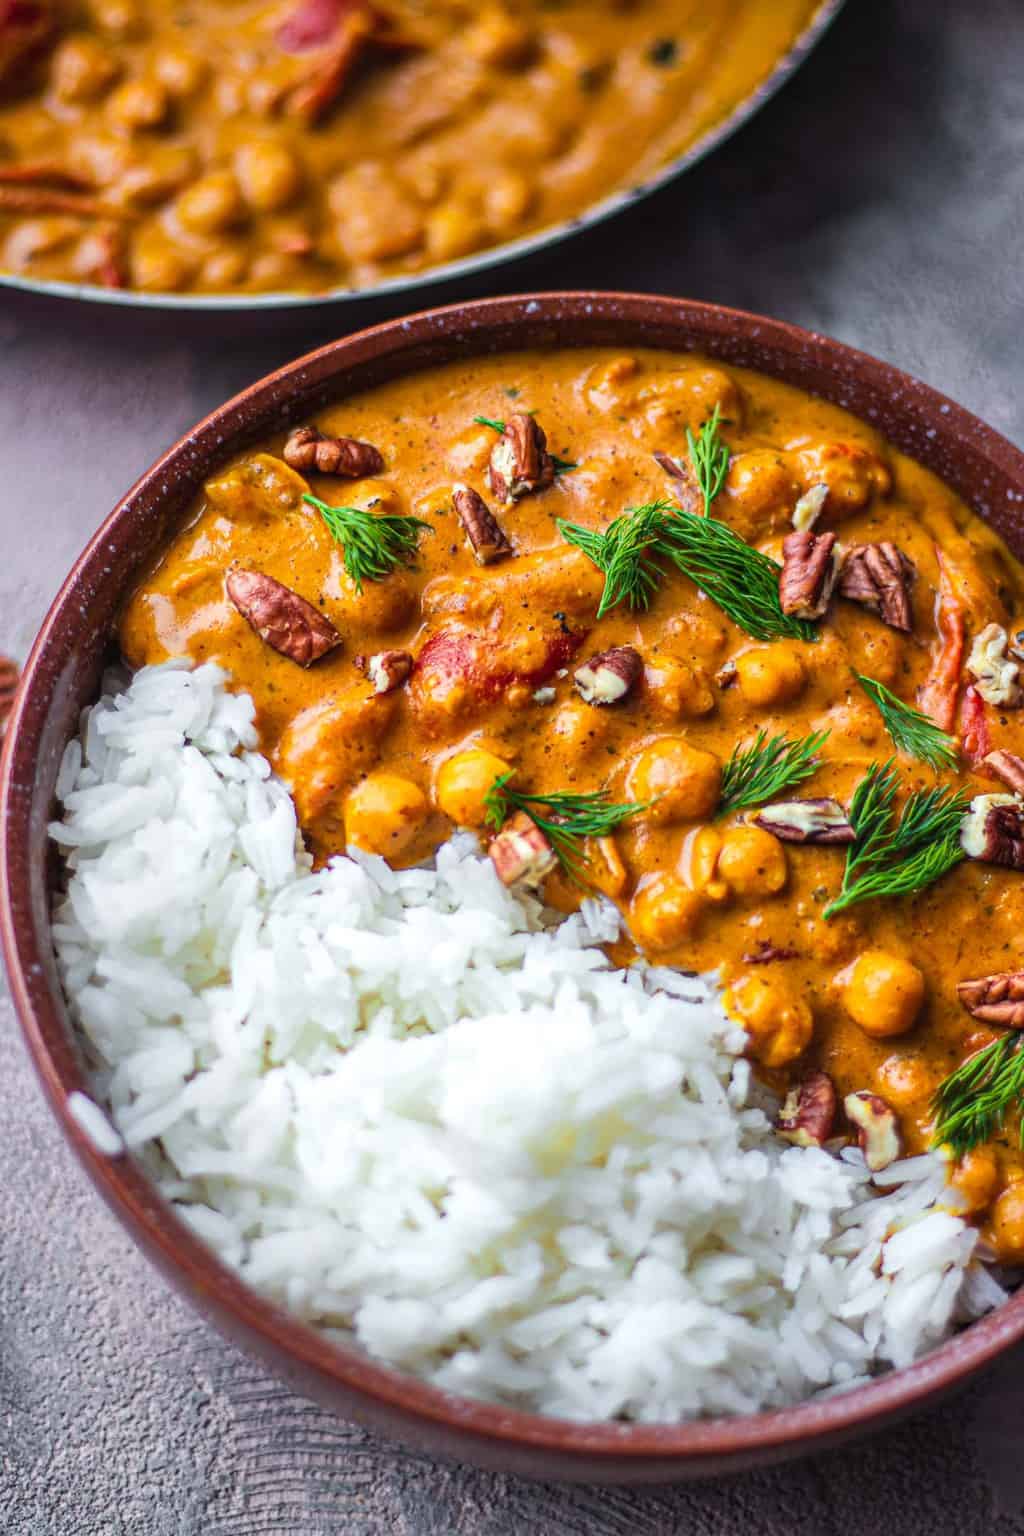 Bowl with vegan chickpeas in a curry sauce and rice